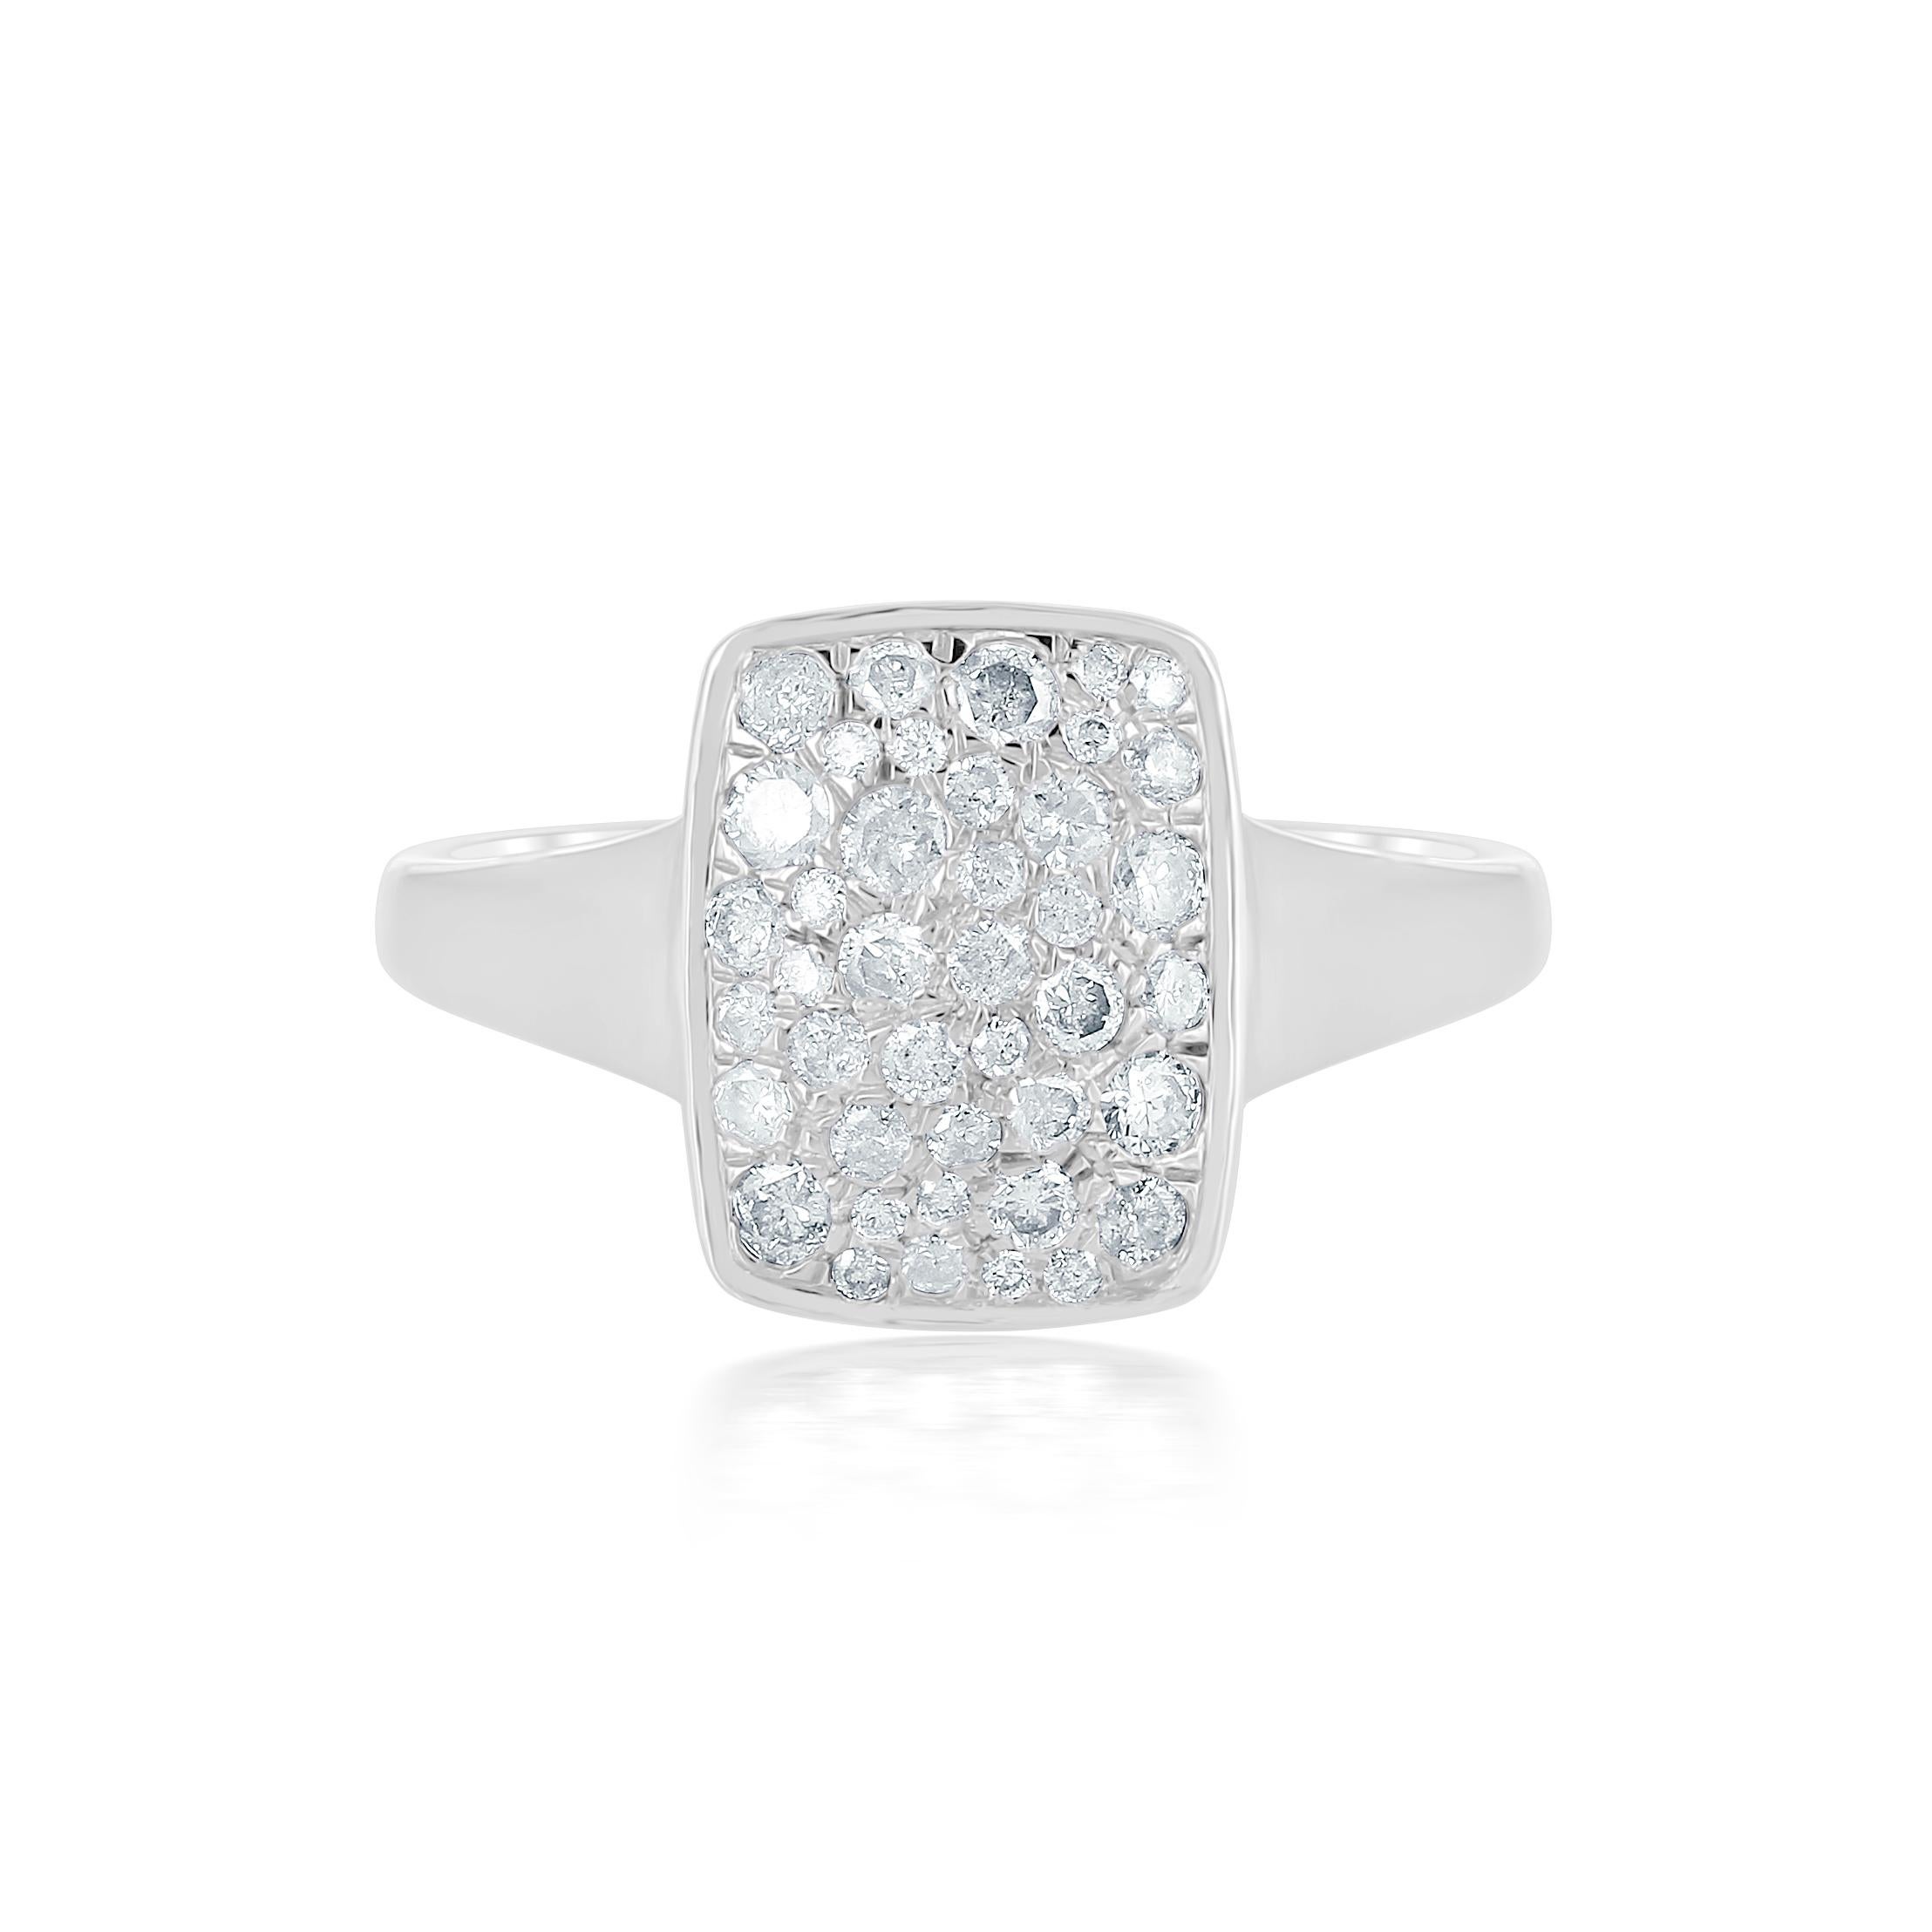 Introducing a mosaic cluster diamond ring by Gemistry! Dazzling 0.63 ct. t.w. round, brilliant cut diamonds dazzle on the rectangular head of the sterling silver band. The prong set diamonds are of HI color and I3 clarity. A gorgeous look that will